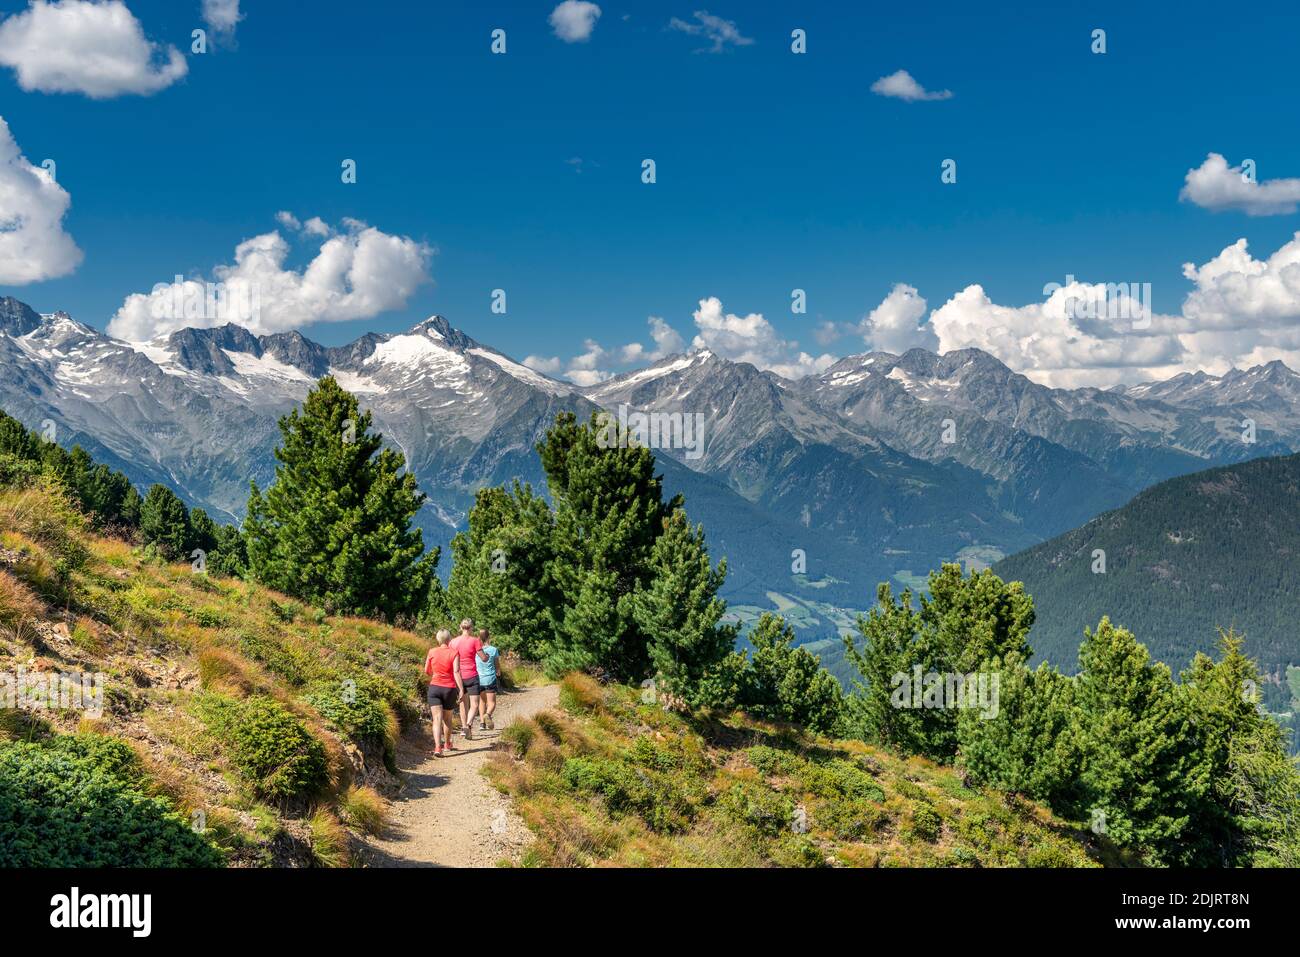 Sand in Taufers, Bolzano Province, South Tyrol, Italy. Hikers on the panorama trail in the Speikboden hiking area. In the background the Zillertal Alps with the peaks Grossen Löffler, Keilbachspitze and Wollbachspitze Stock Photo